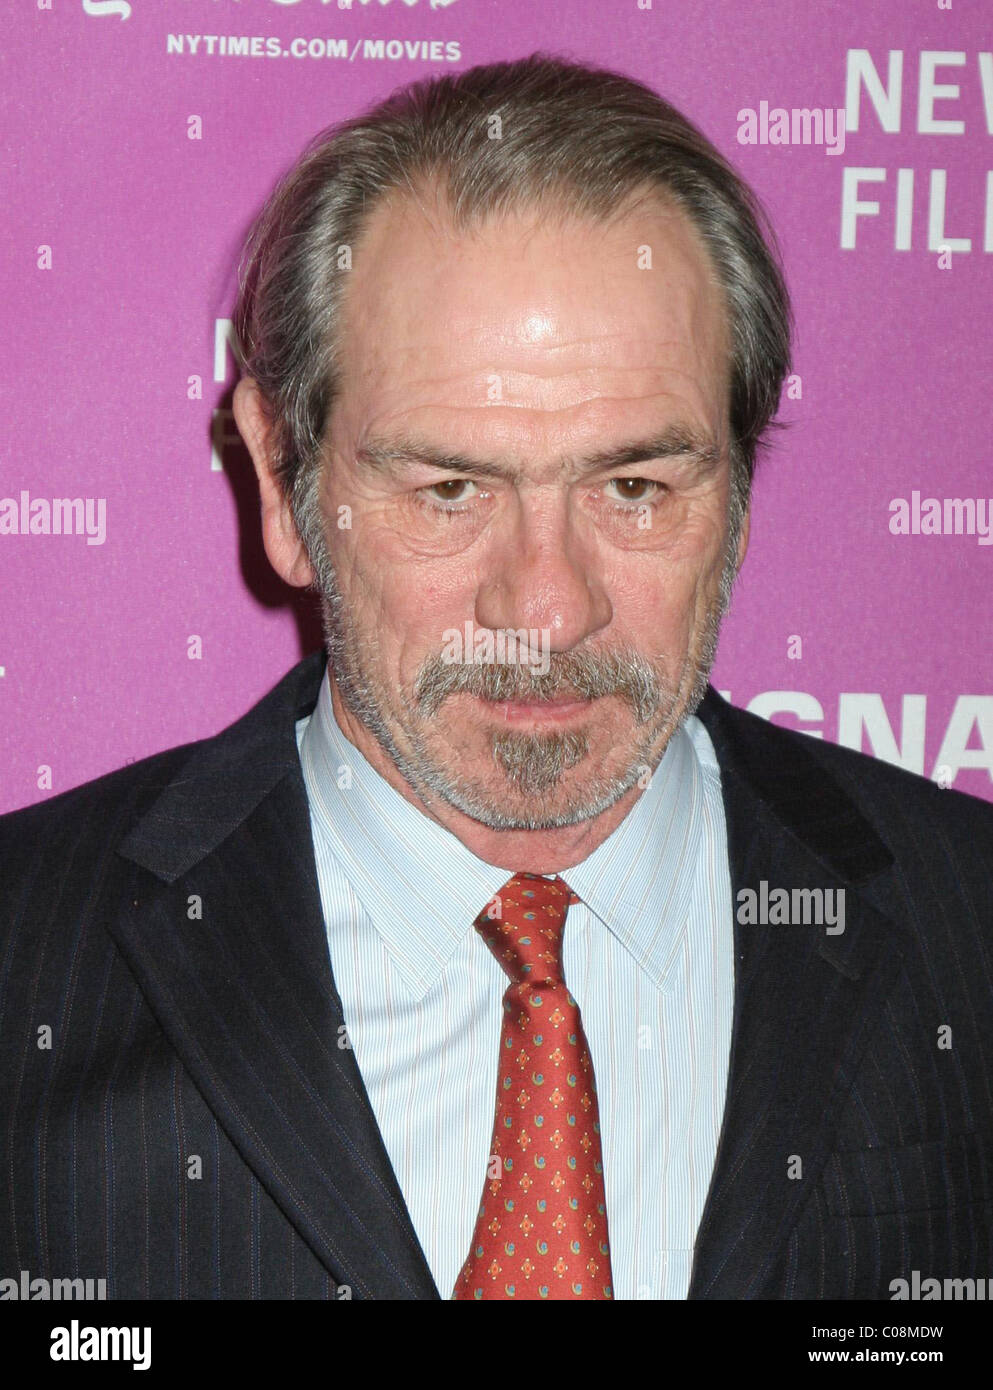 Tommy Lee Jones and wife Arrivals for NYFF 